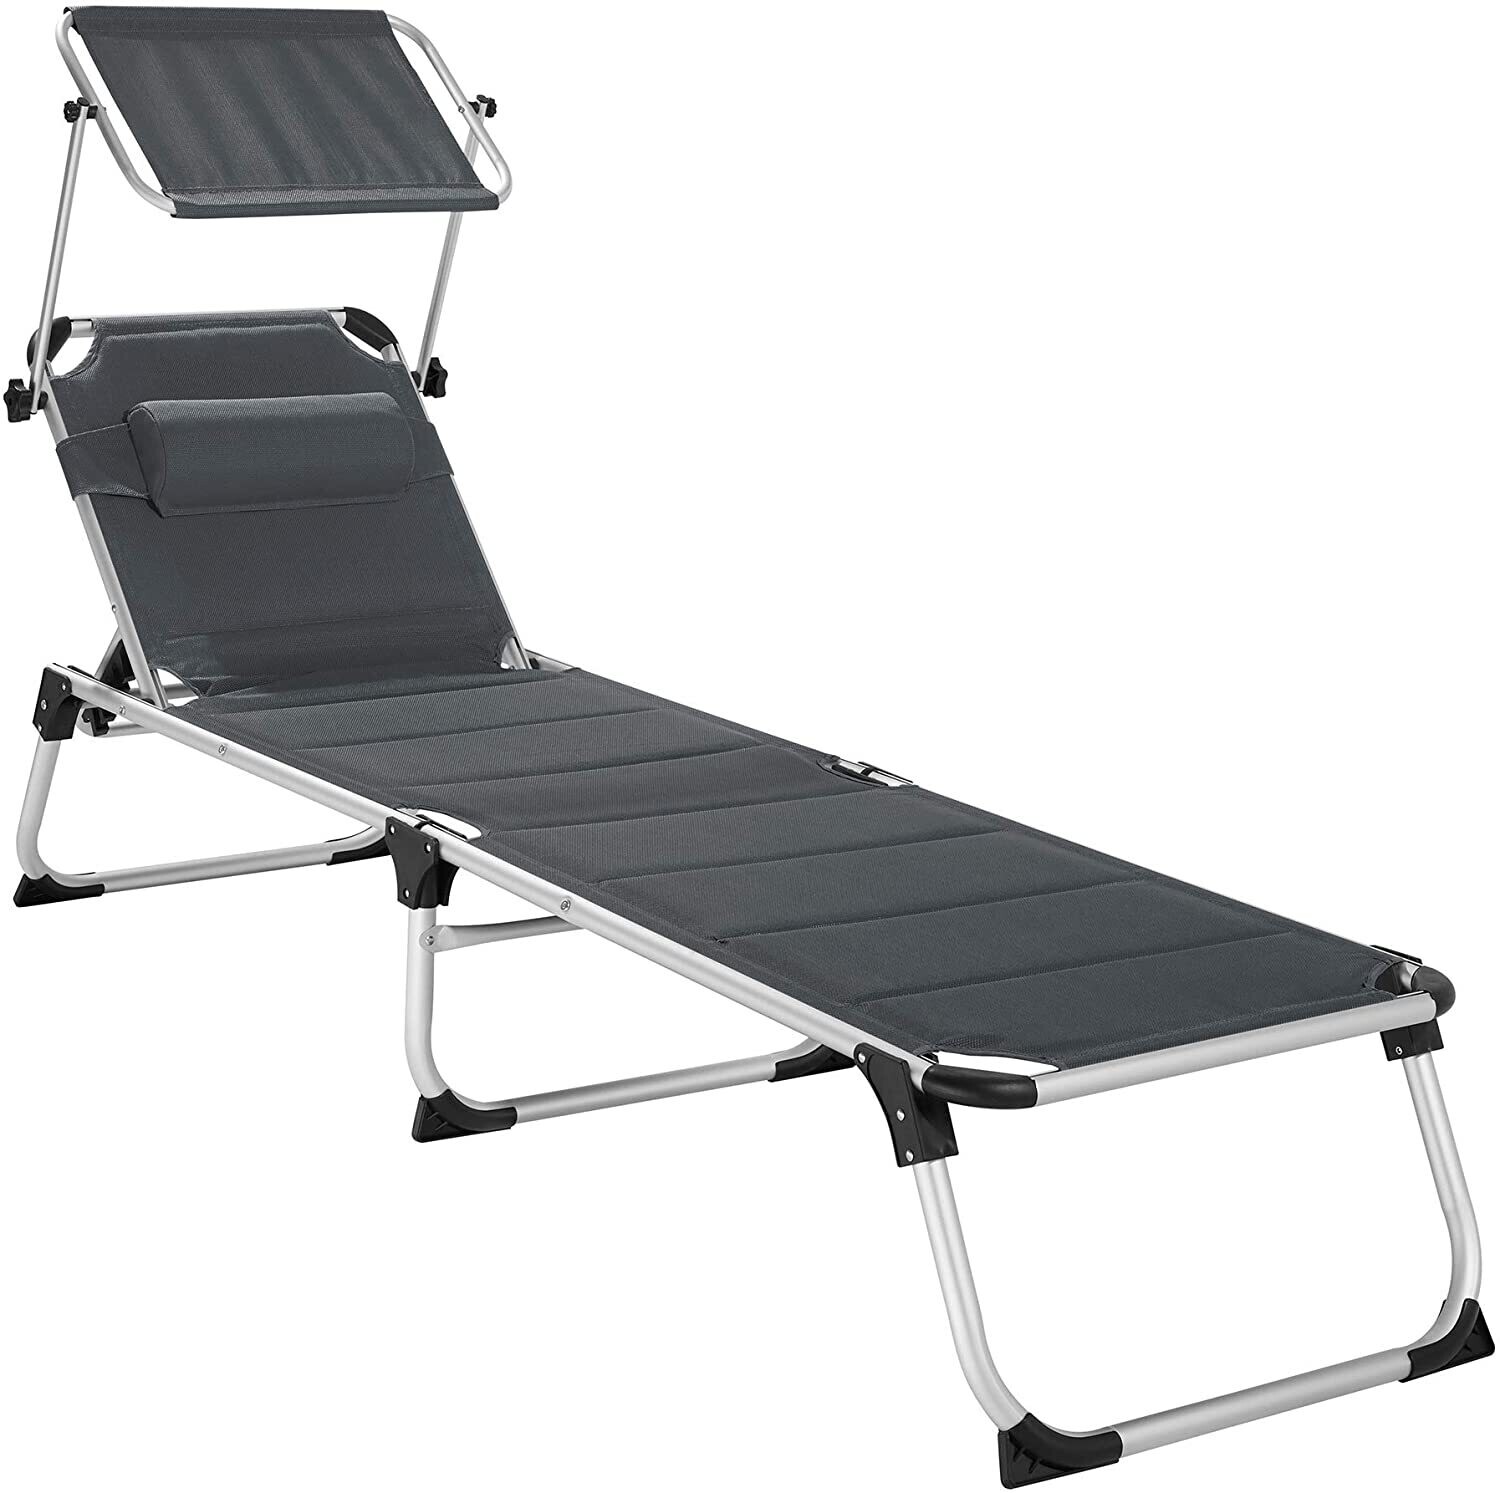 Foldable Aluminium Garden Lounger with Roof & Pillow, Padded Lying Surface with 6-Way Adjustable Backrest and Two Carry Handles.